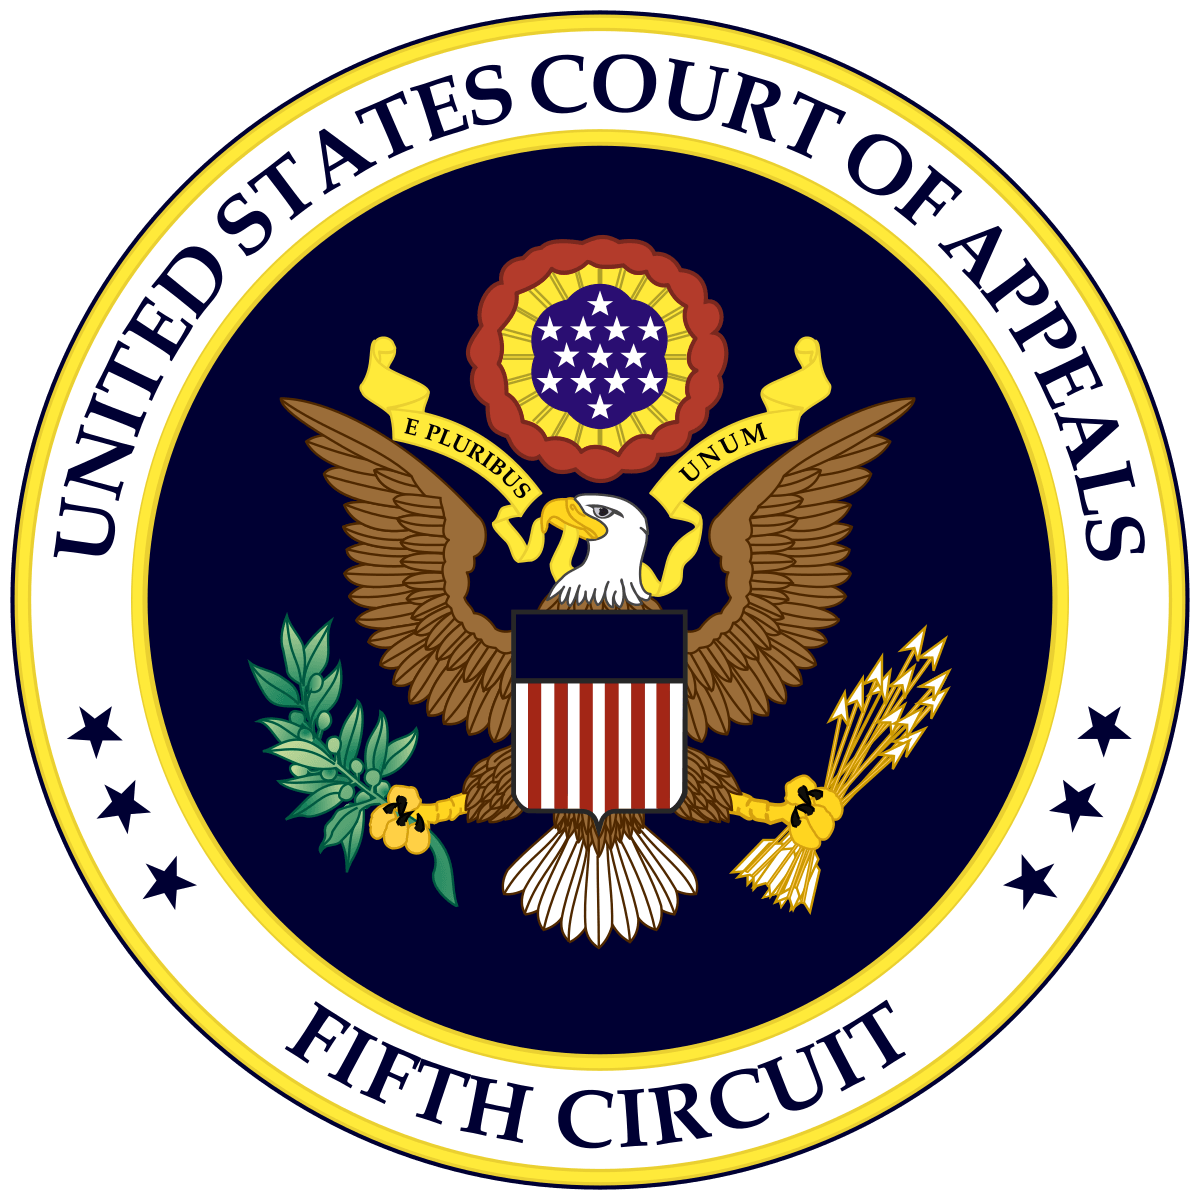 First Circuit City Logo - United States Court of Appeals for the Fifth Circuit